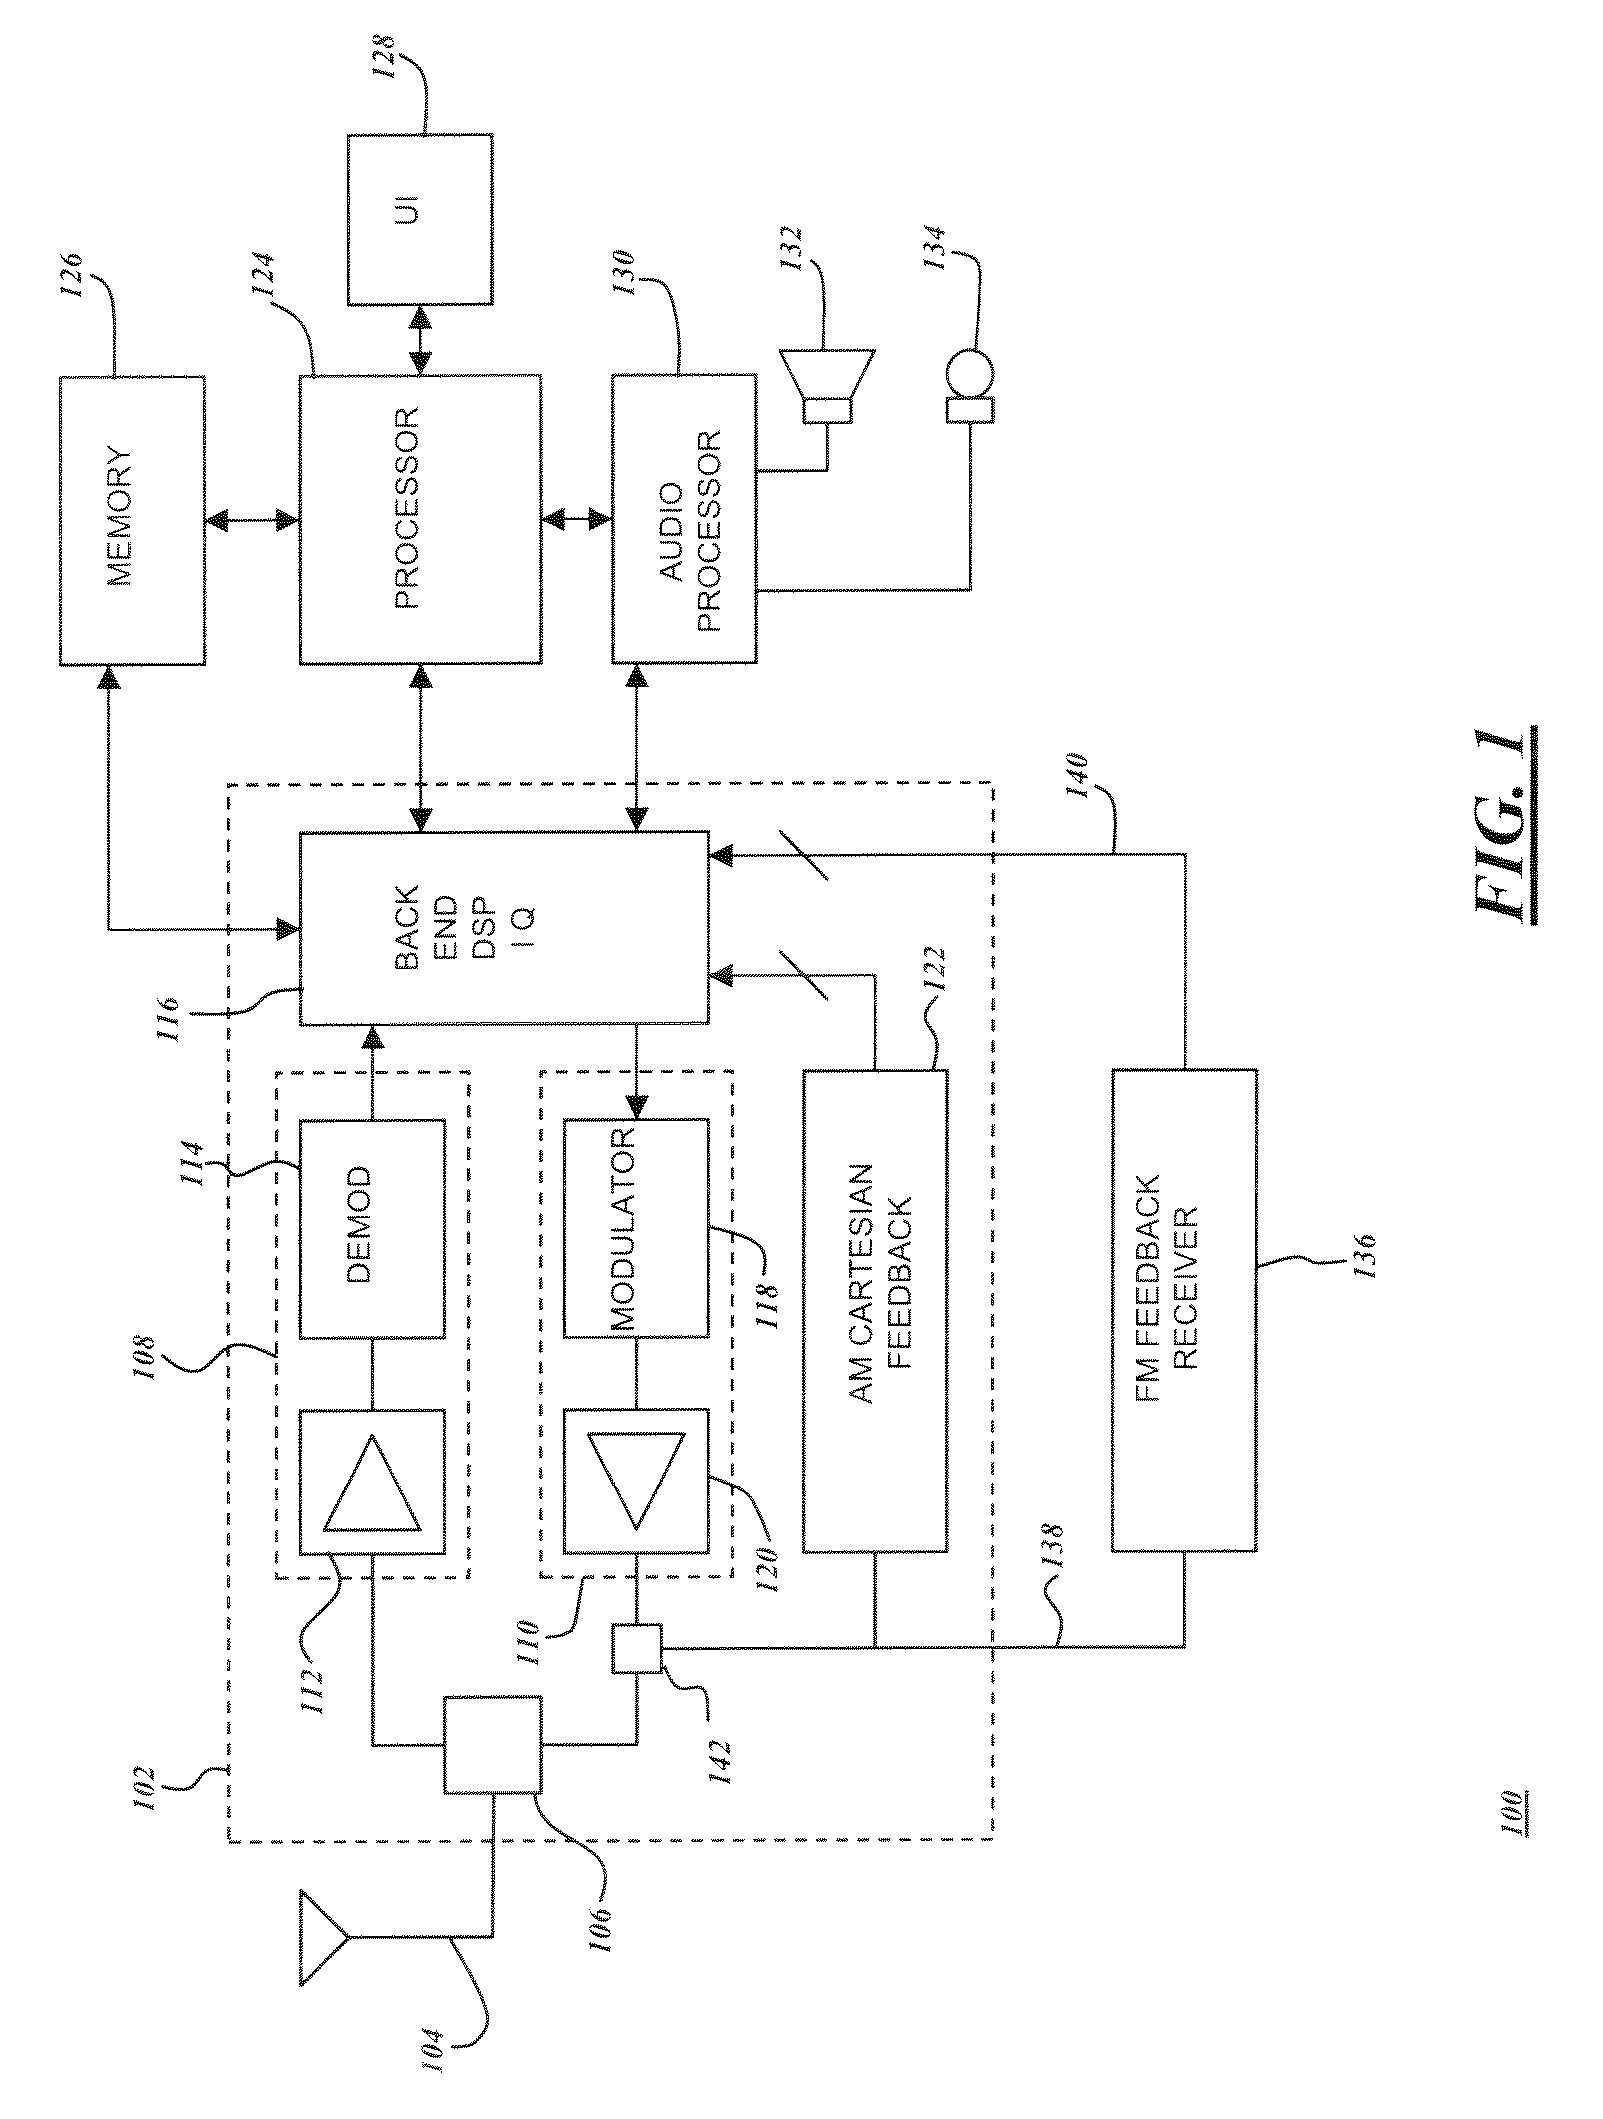 Method and apparatus for generating constant envelope modulation using a quadrature transmitter